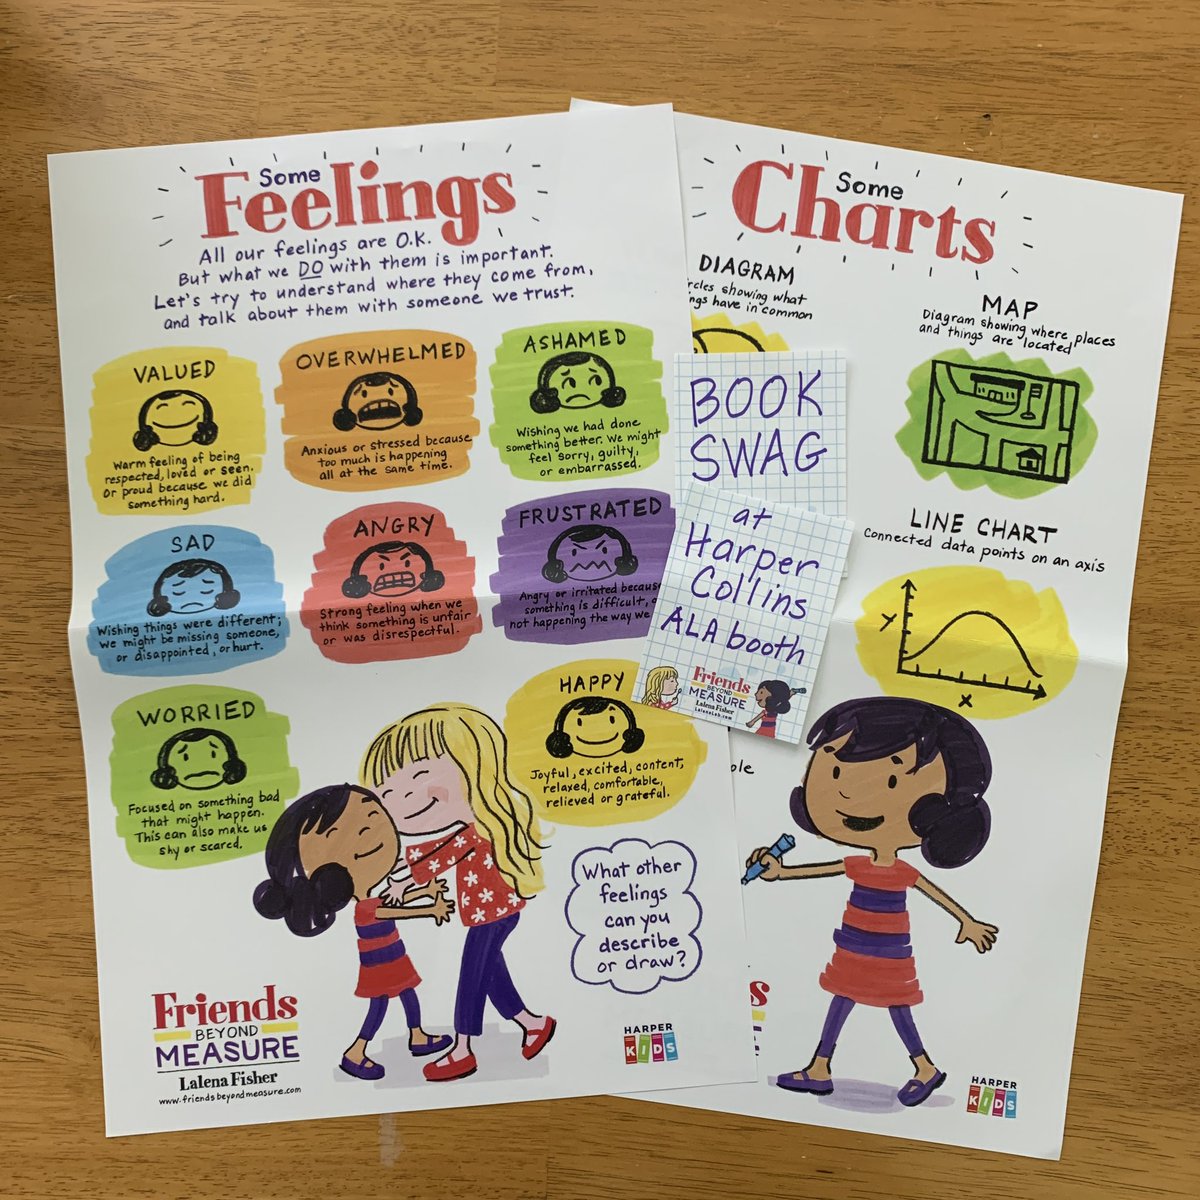 Get cute+useful (cuseful?) #bookswag for four-starred #picturebook #FriendsBeyondMeasure at the @HarperCollins booth 3611 #ALAAC23 ! Posters on Feelings and Charts, below. 
@HarperChildrens @HarperChildrens 
#libraryconference  #librariestransform #ala2023 #librarian